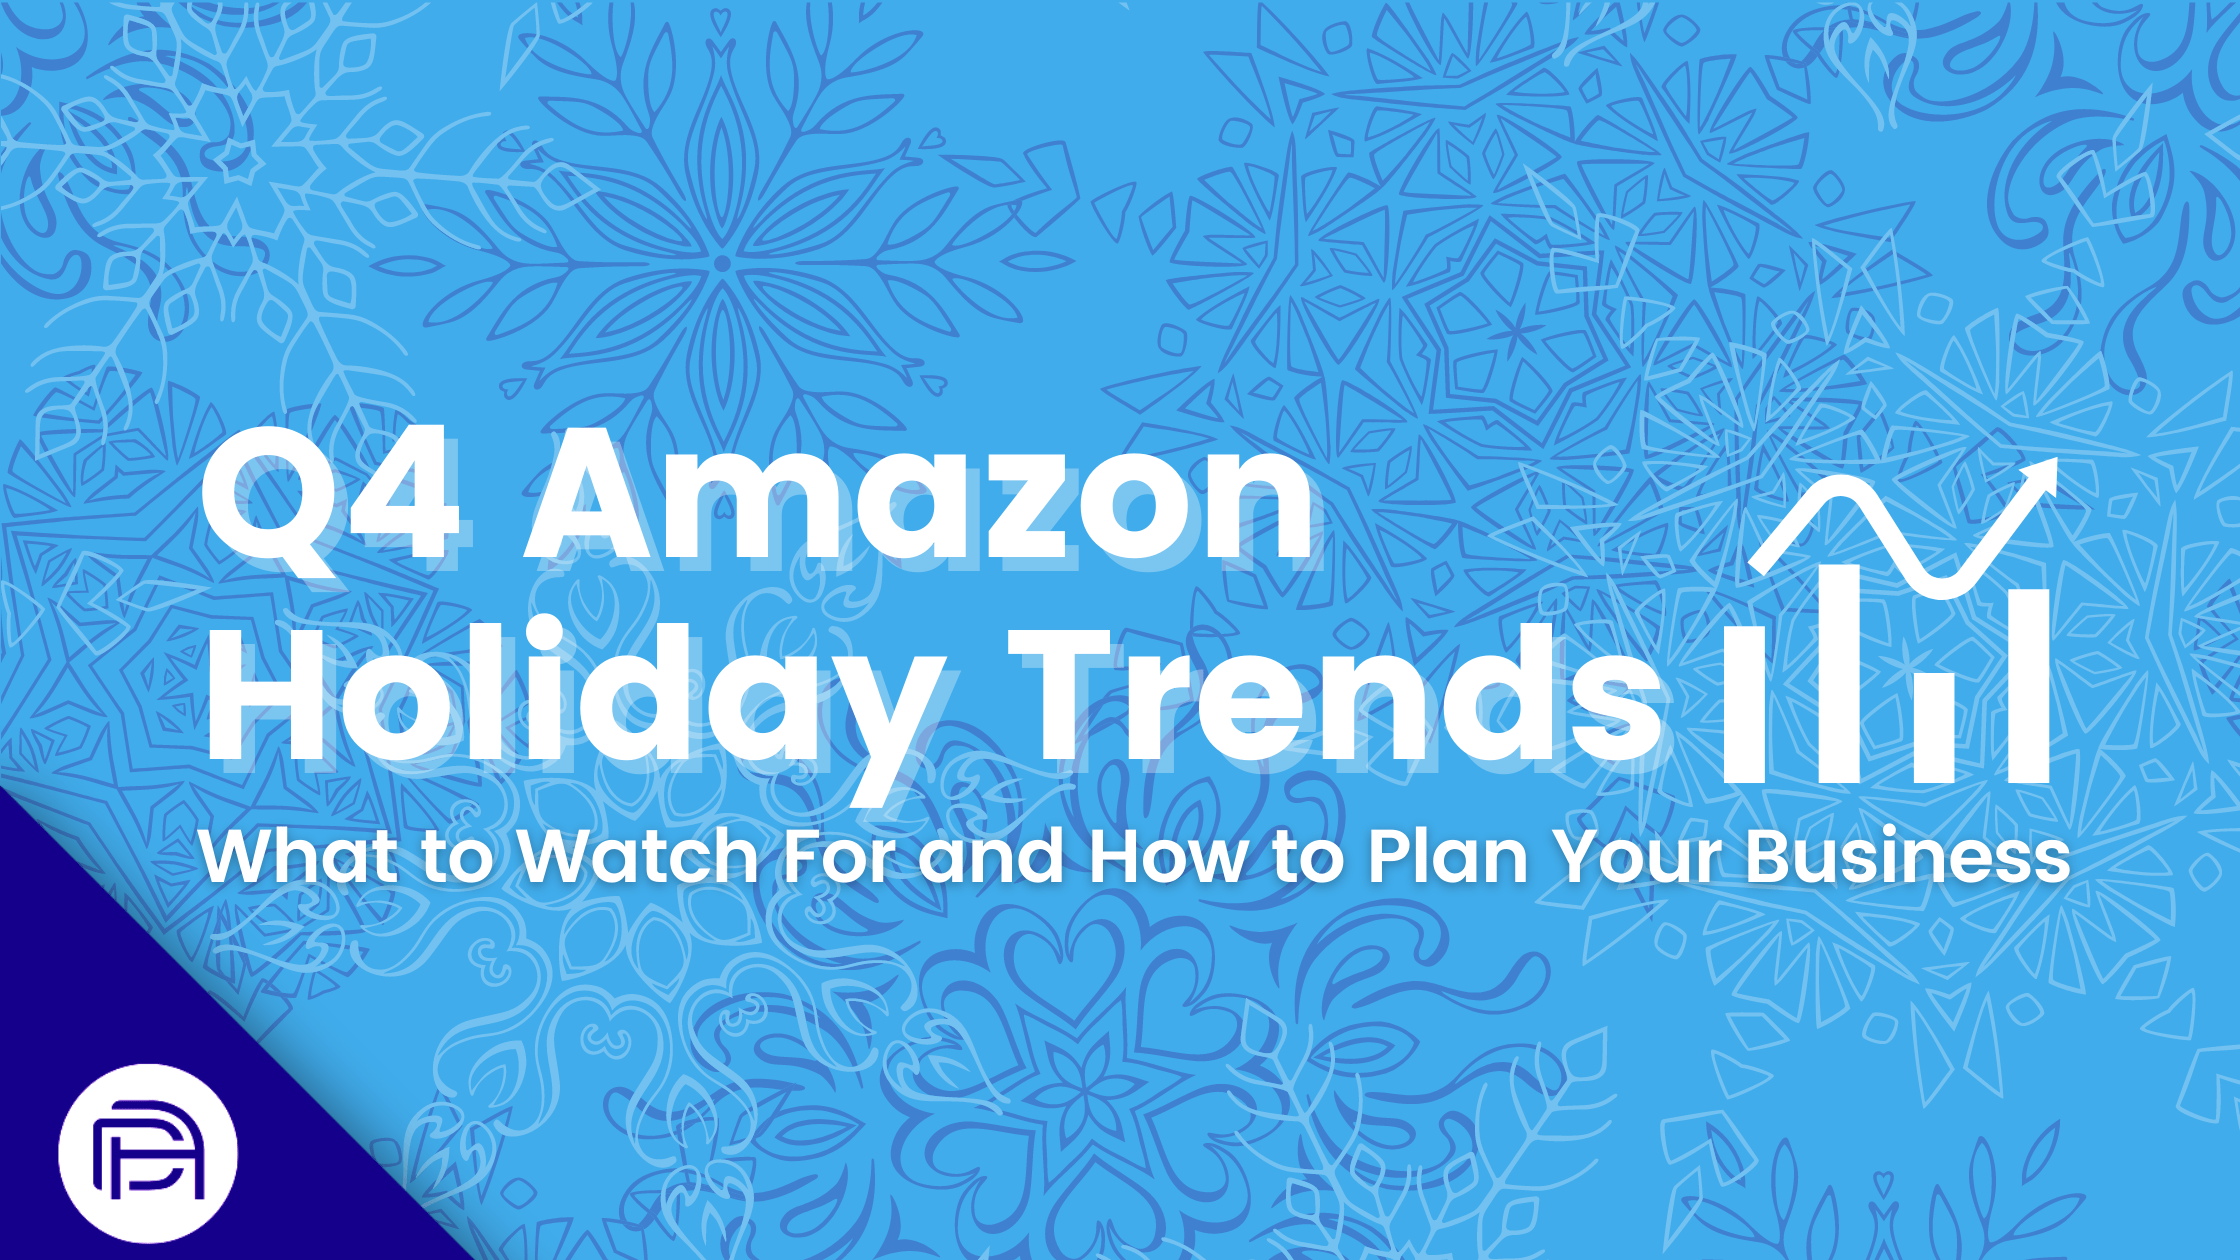 Q4 Amazon Holiday Trends: What to Watch For and How to Plan Your Business